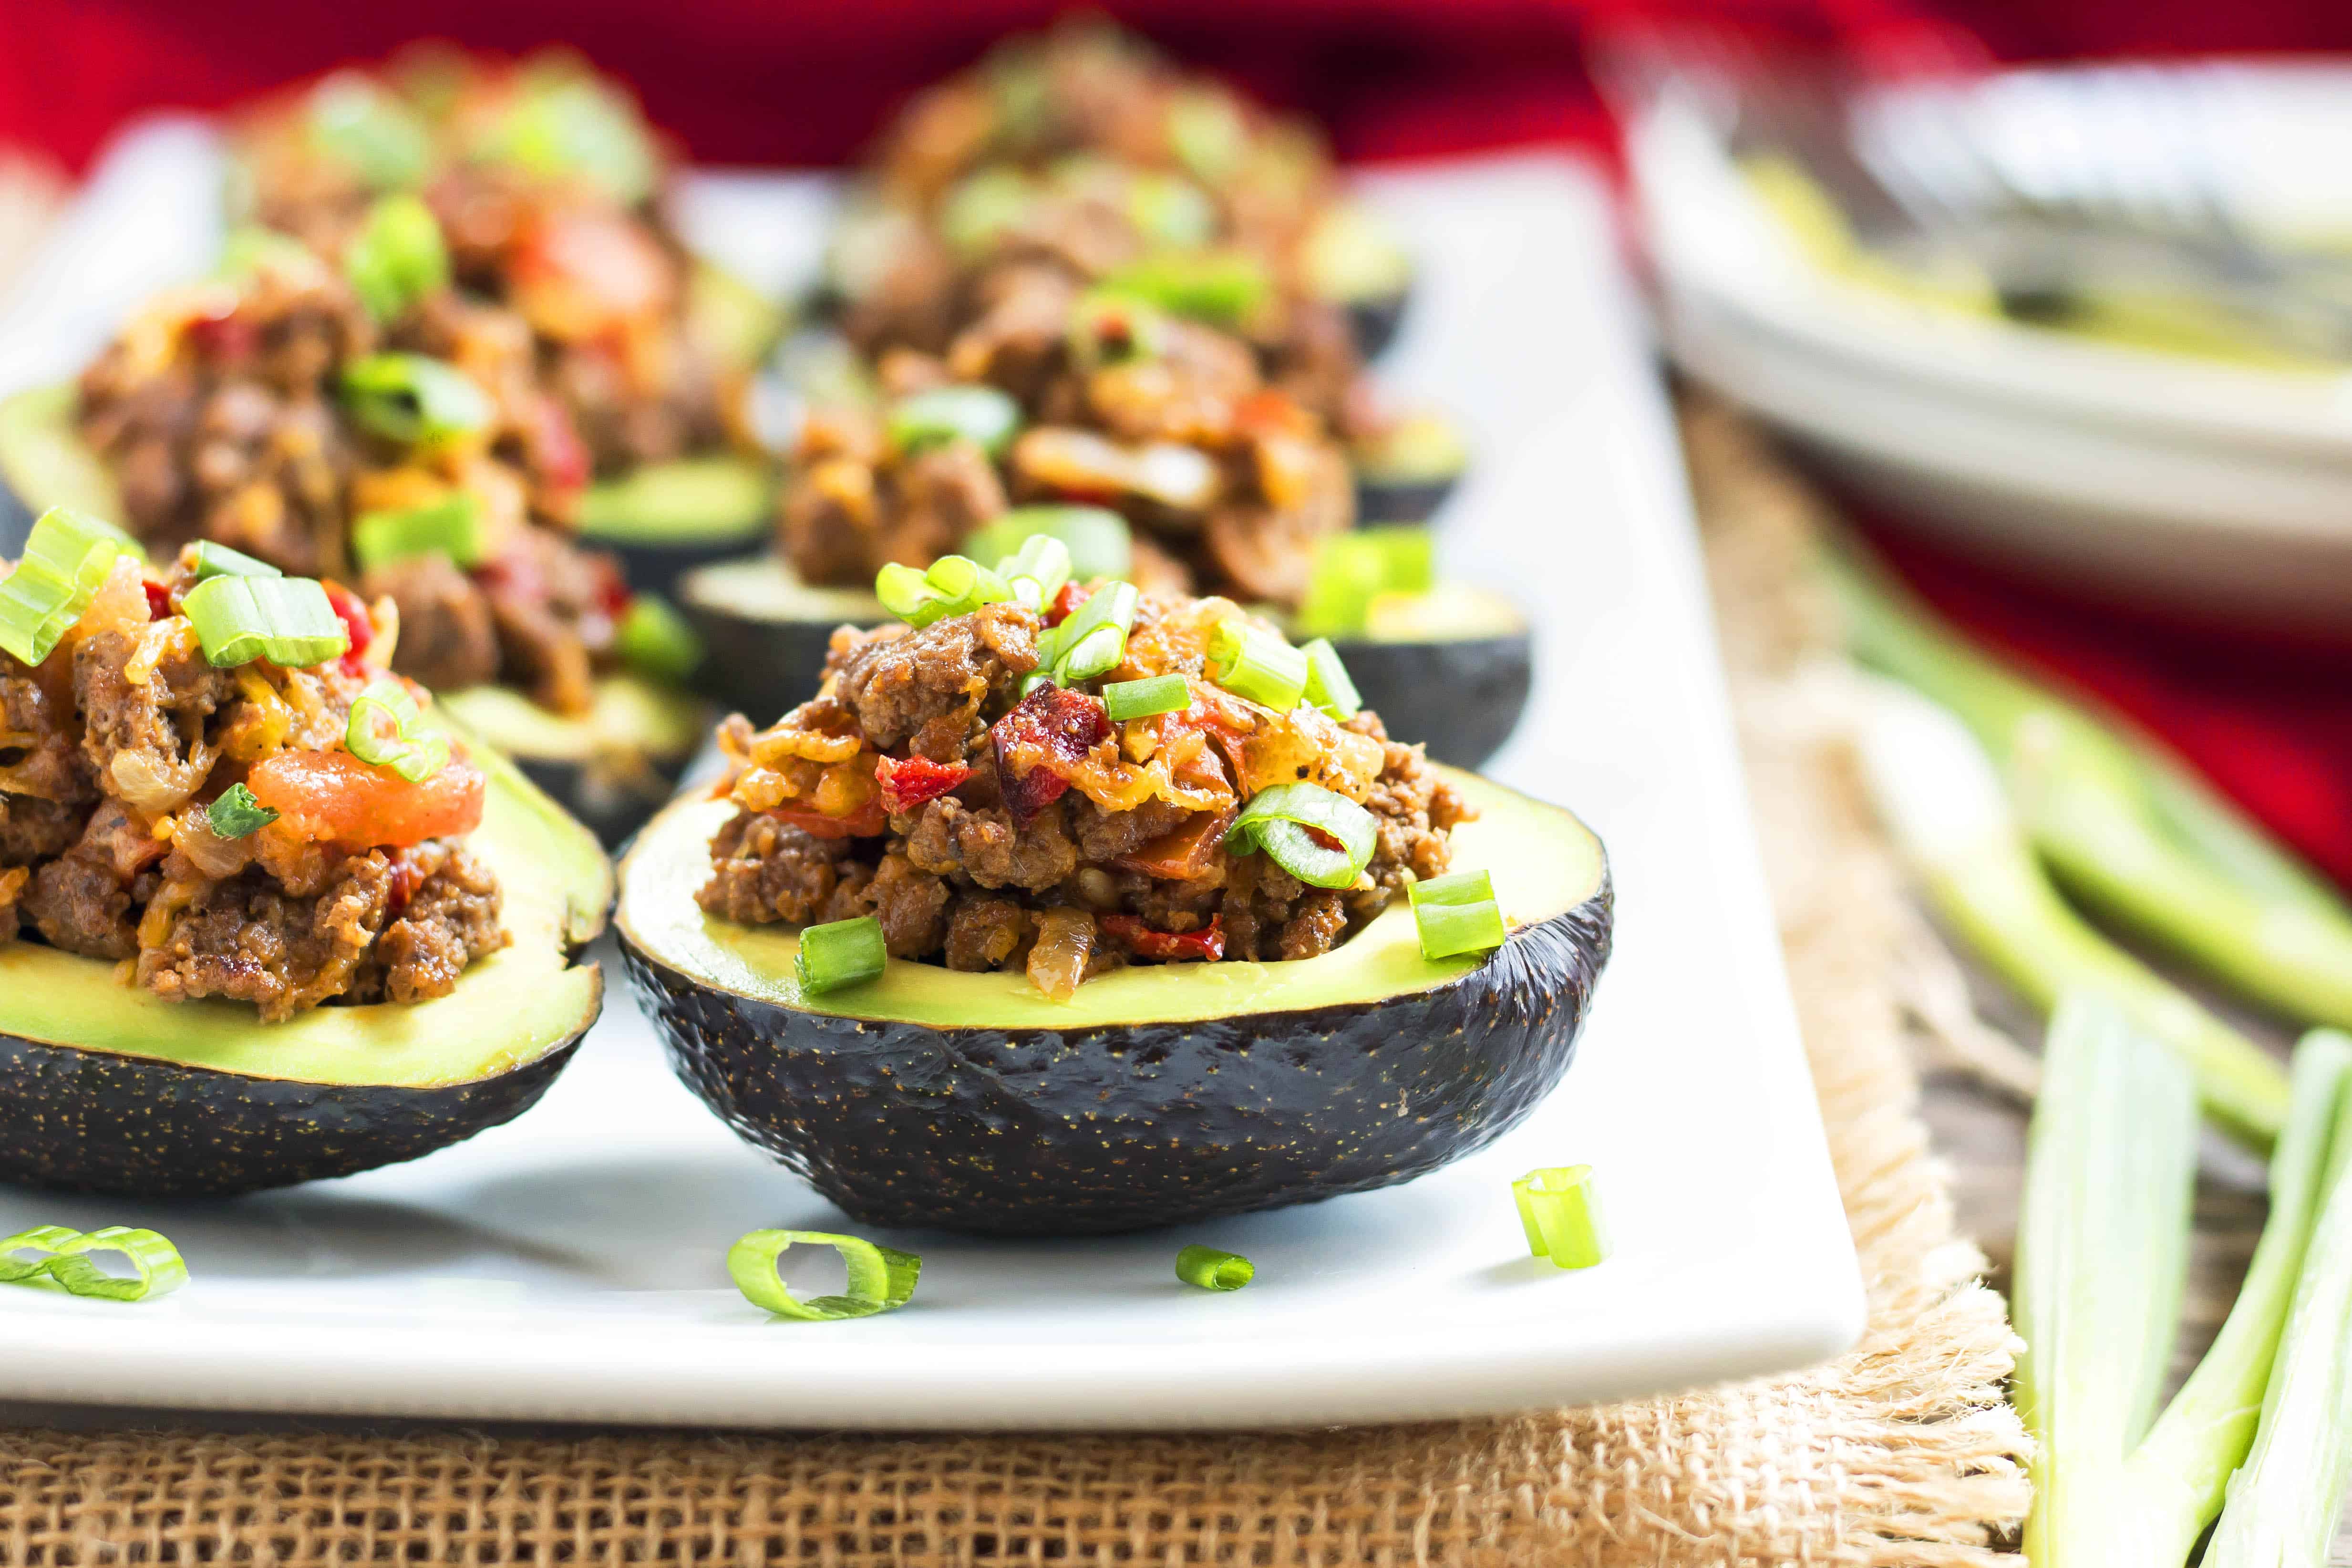 Beef Taco Stuffed Avocados | Gluten Free with L.B.